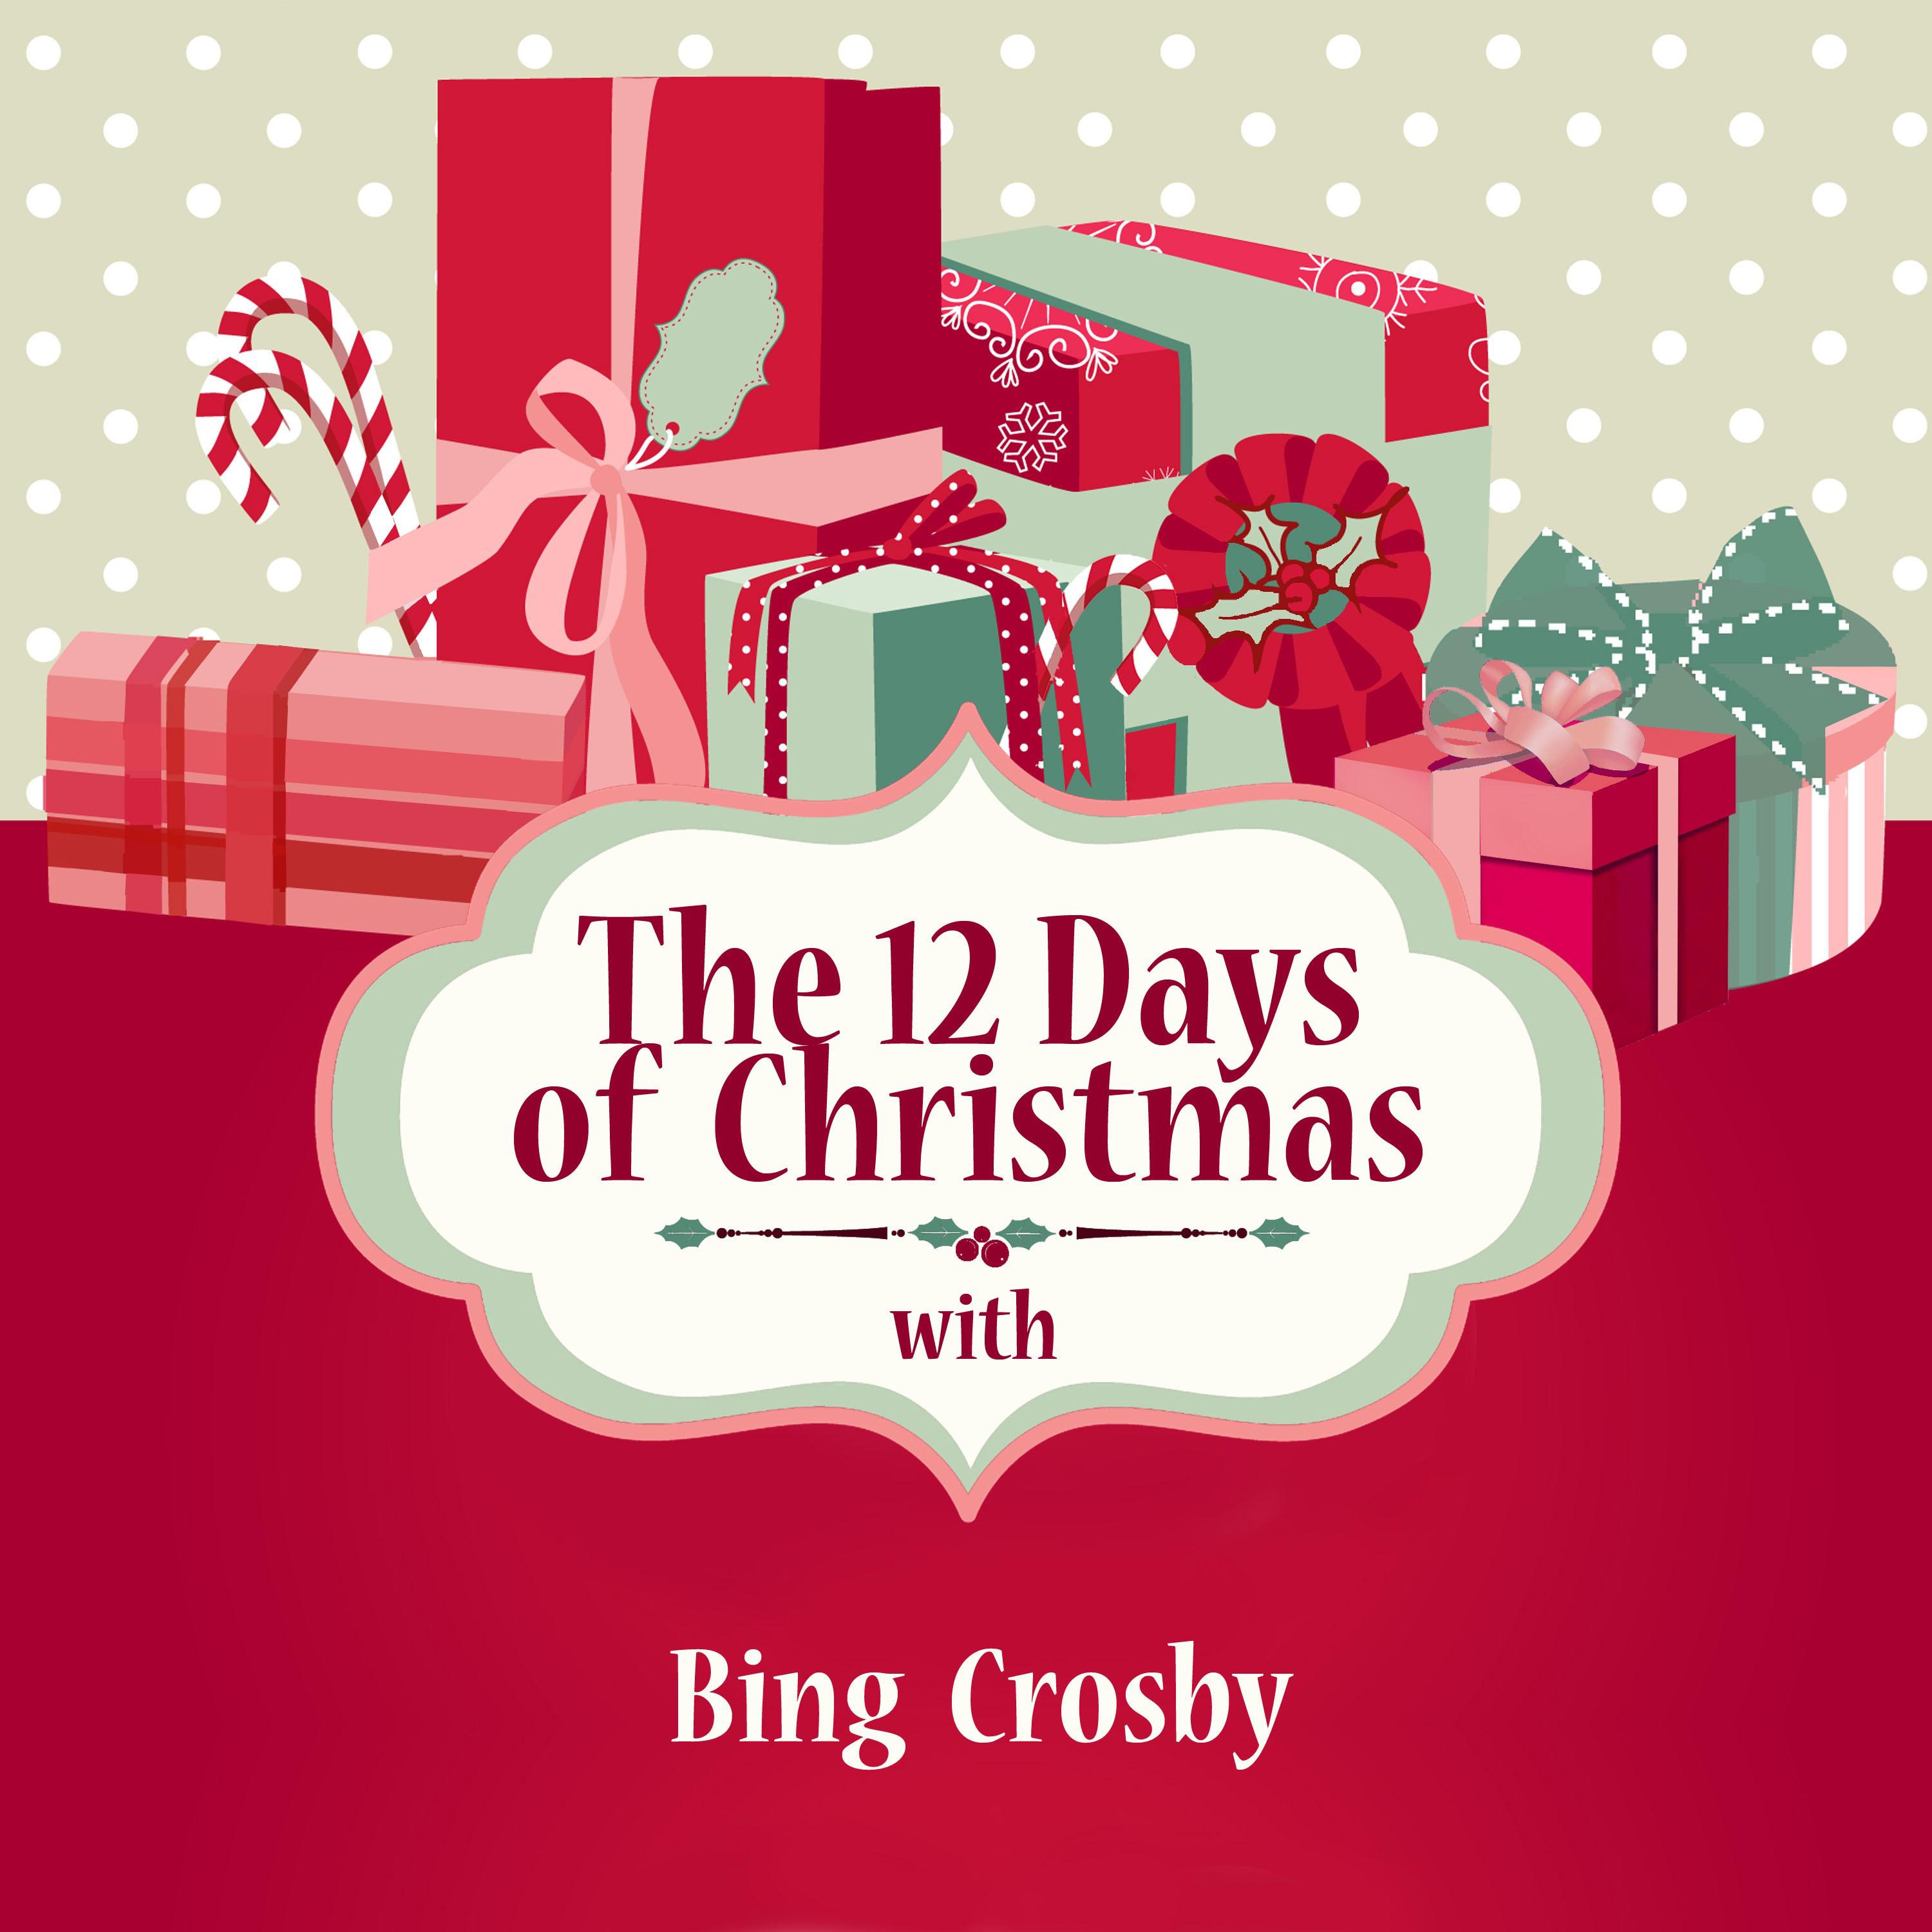 The 12 Days of Christmas with Bing Crosby